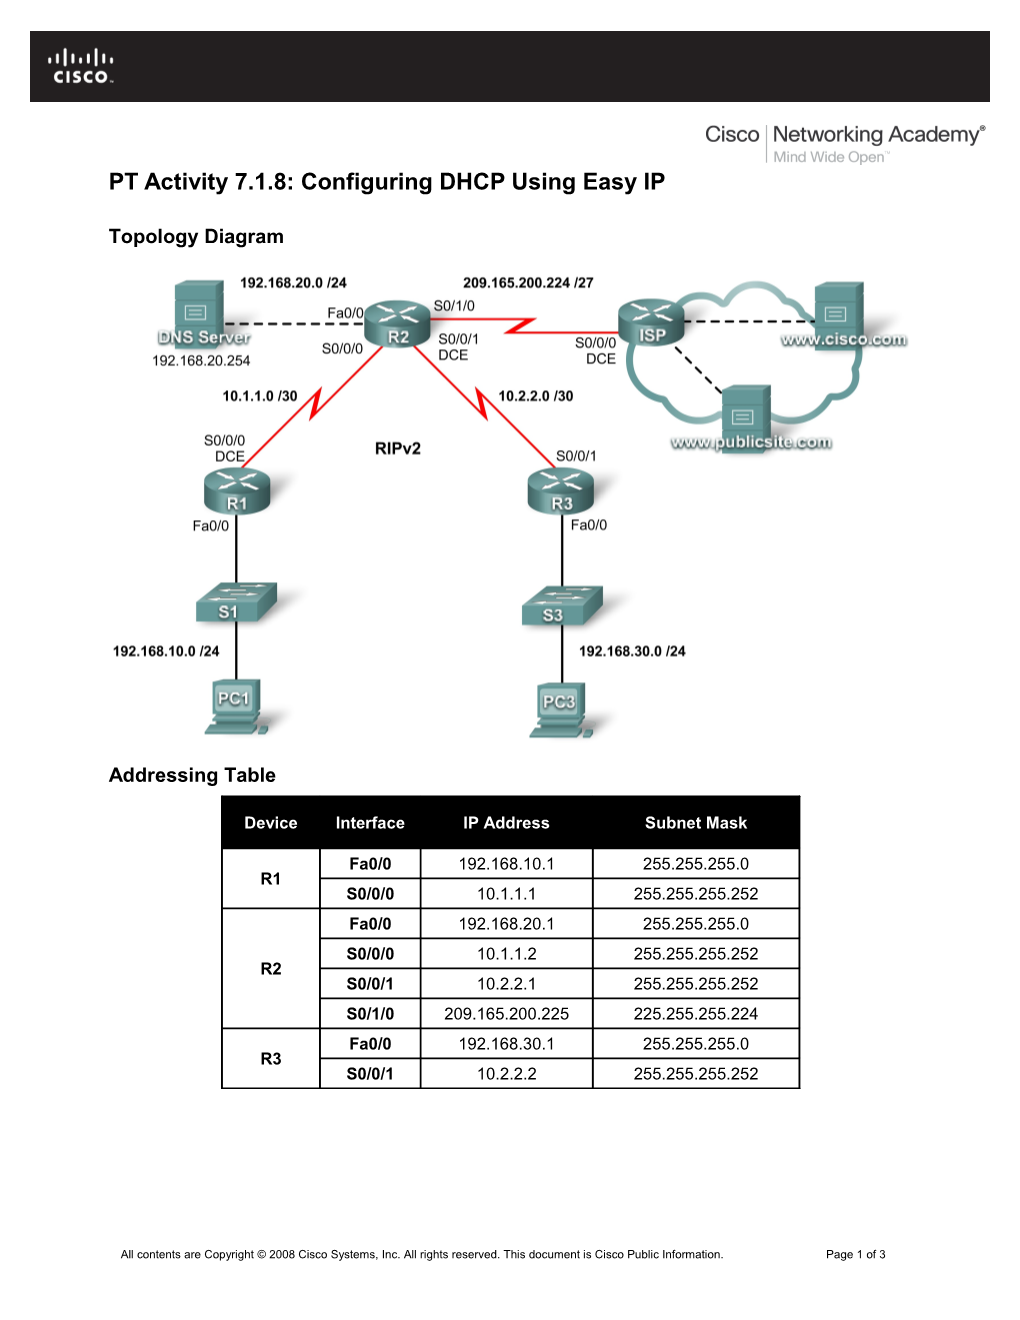 PT Activity 7.1.8: Configuring DHCP Using Easy IP